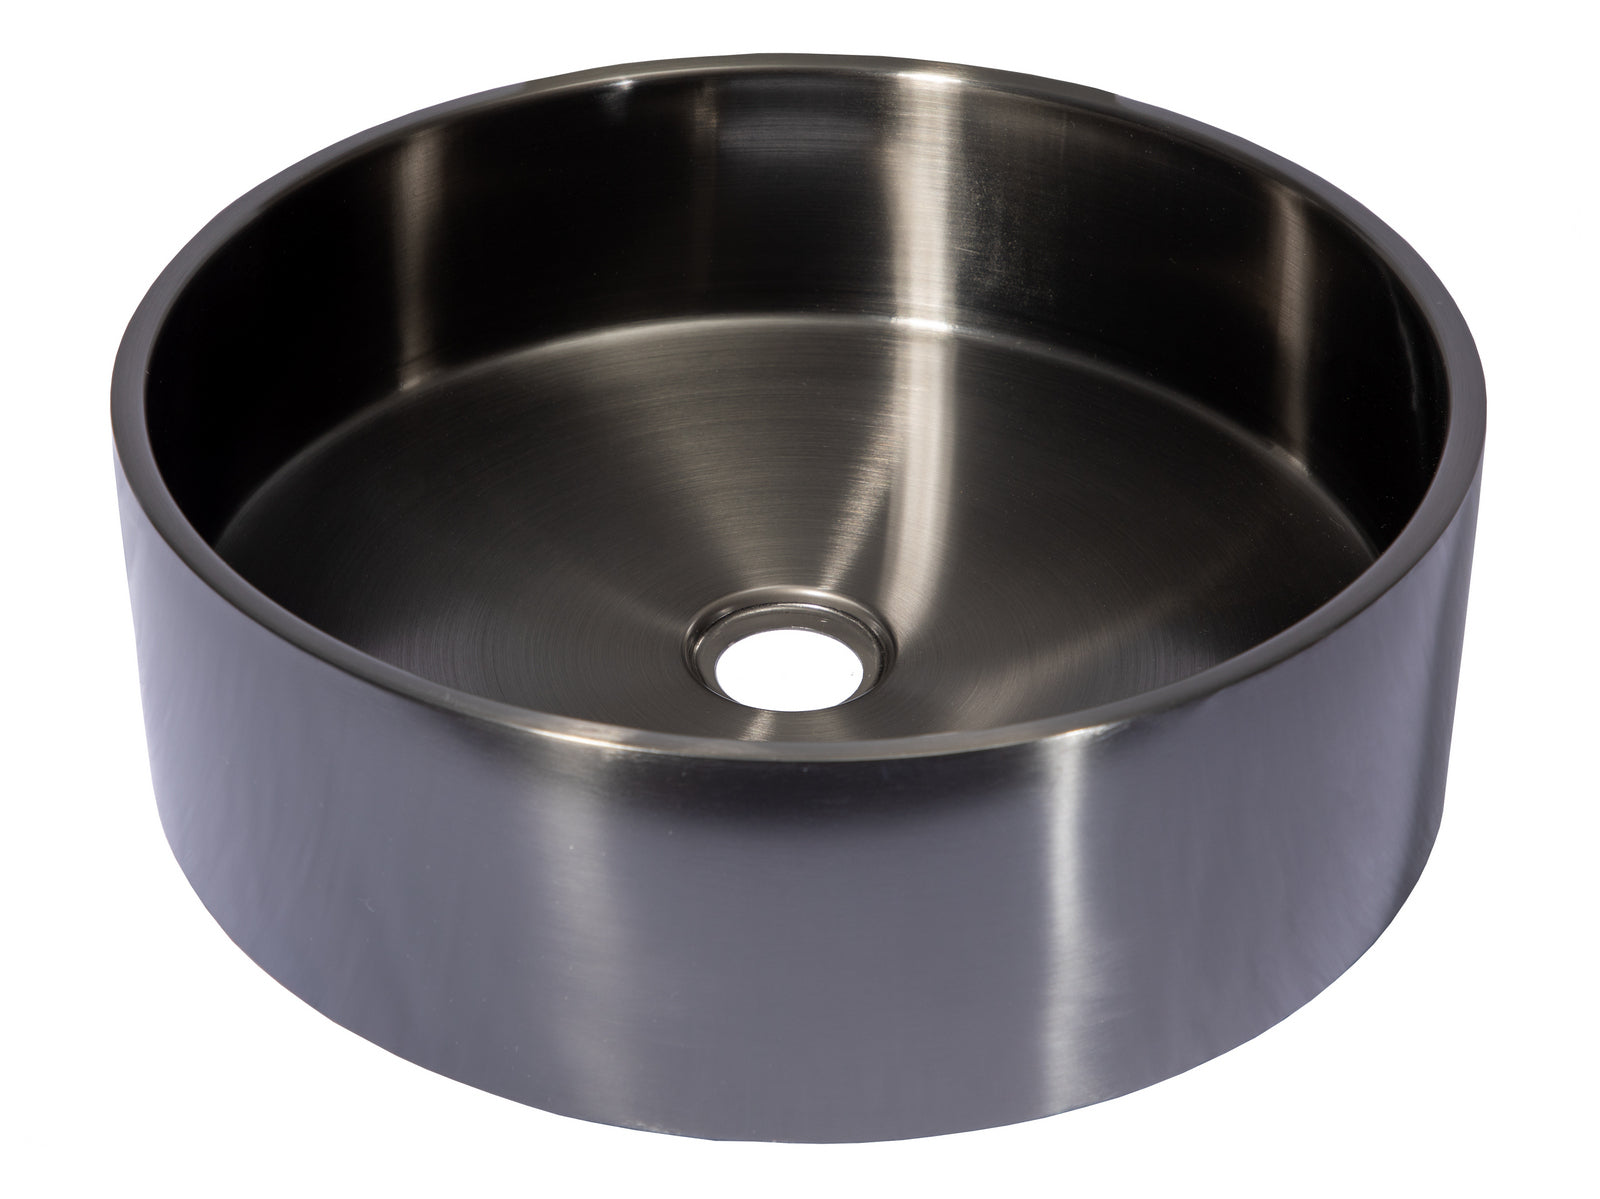 15 3/4" Round Thick Rim Stainless Steel Bathroom Vessel Sink with Drain in Black